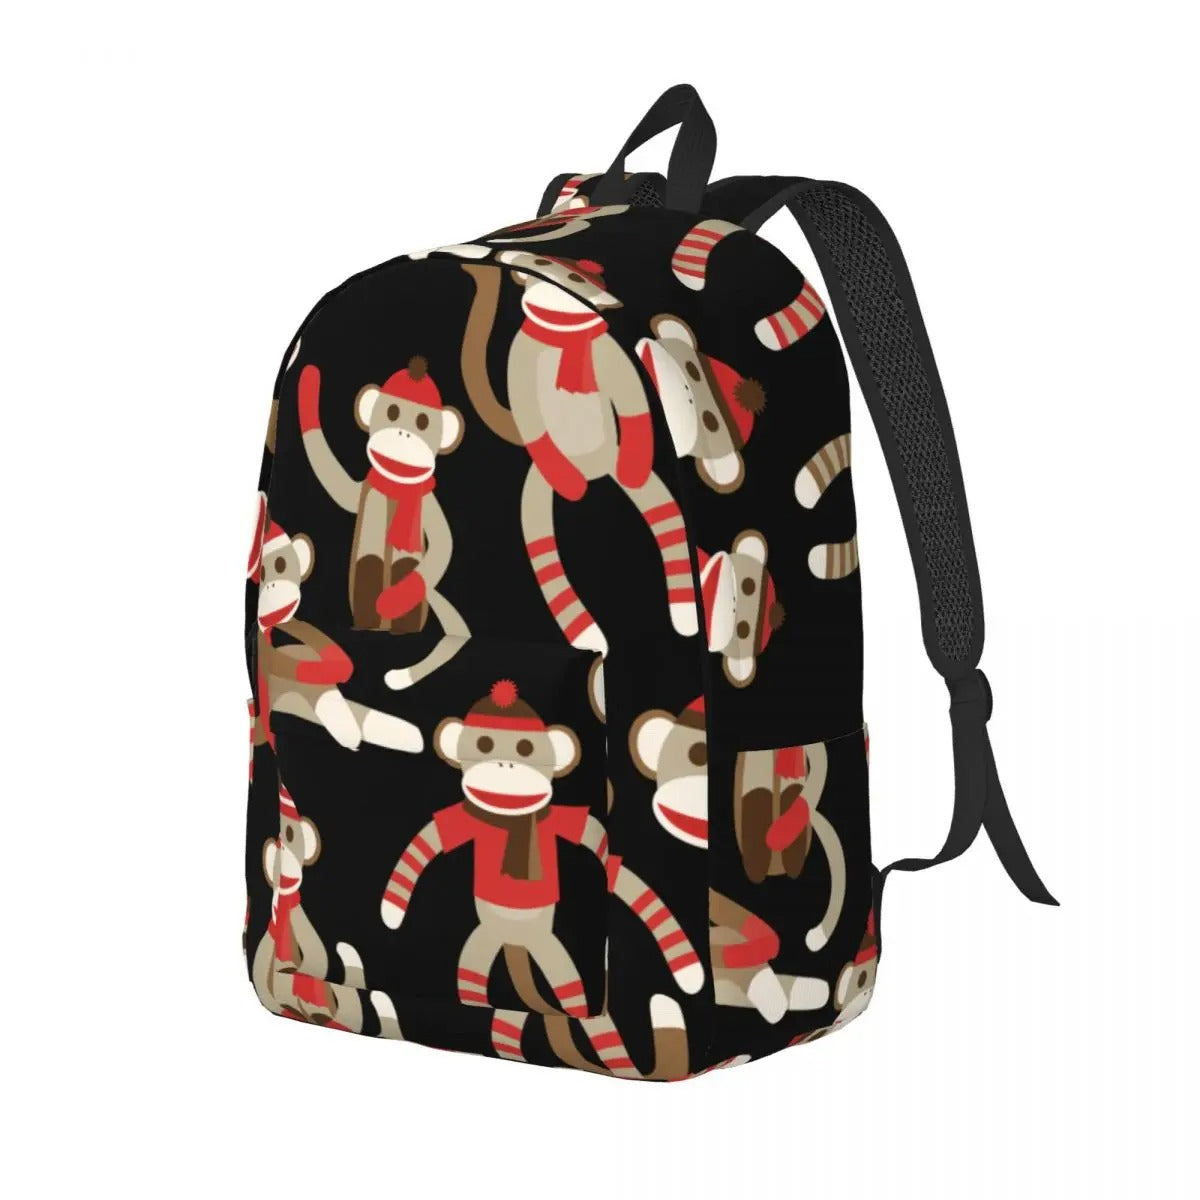 Monkey Backpack for Adults